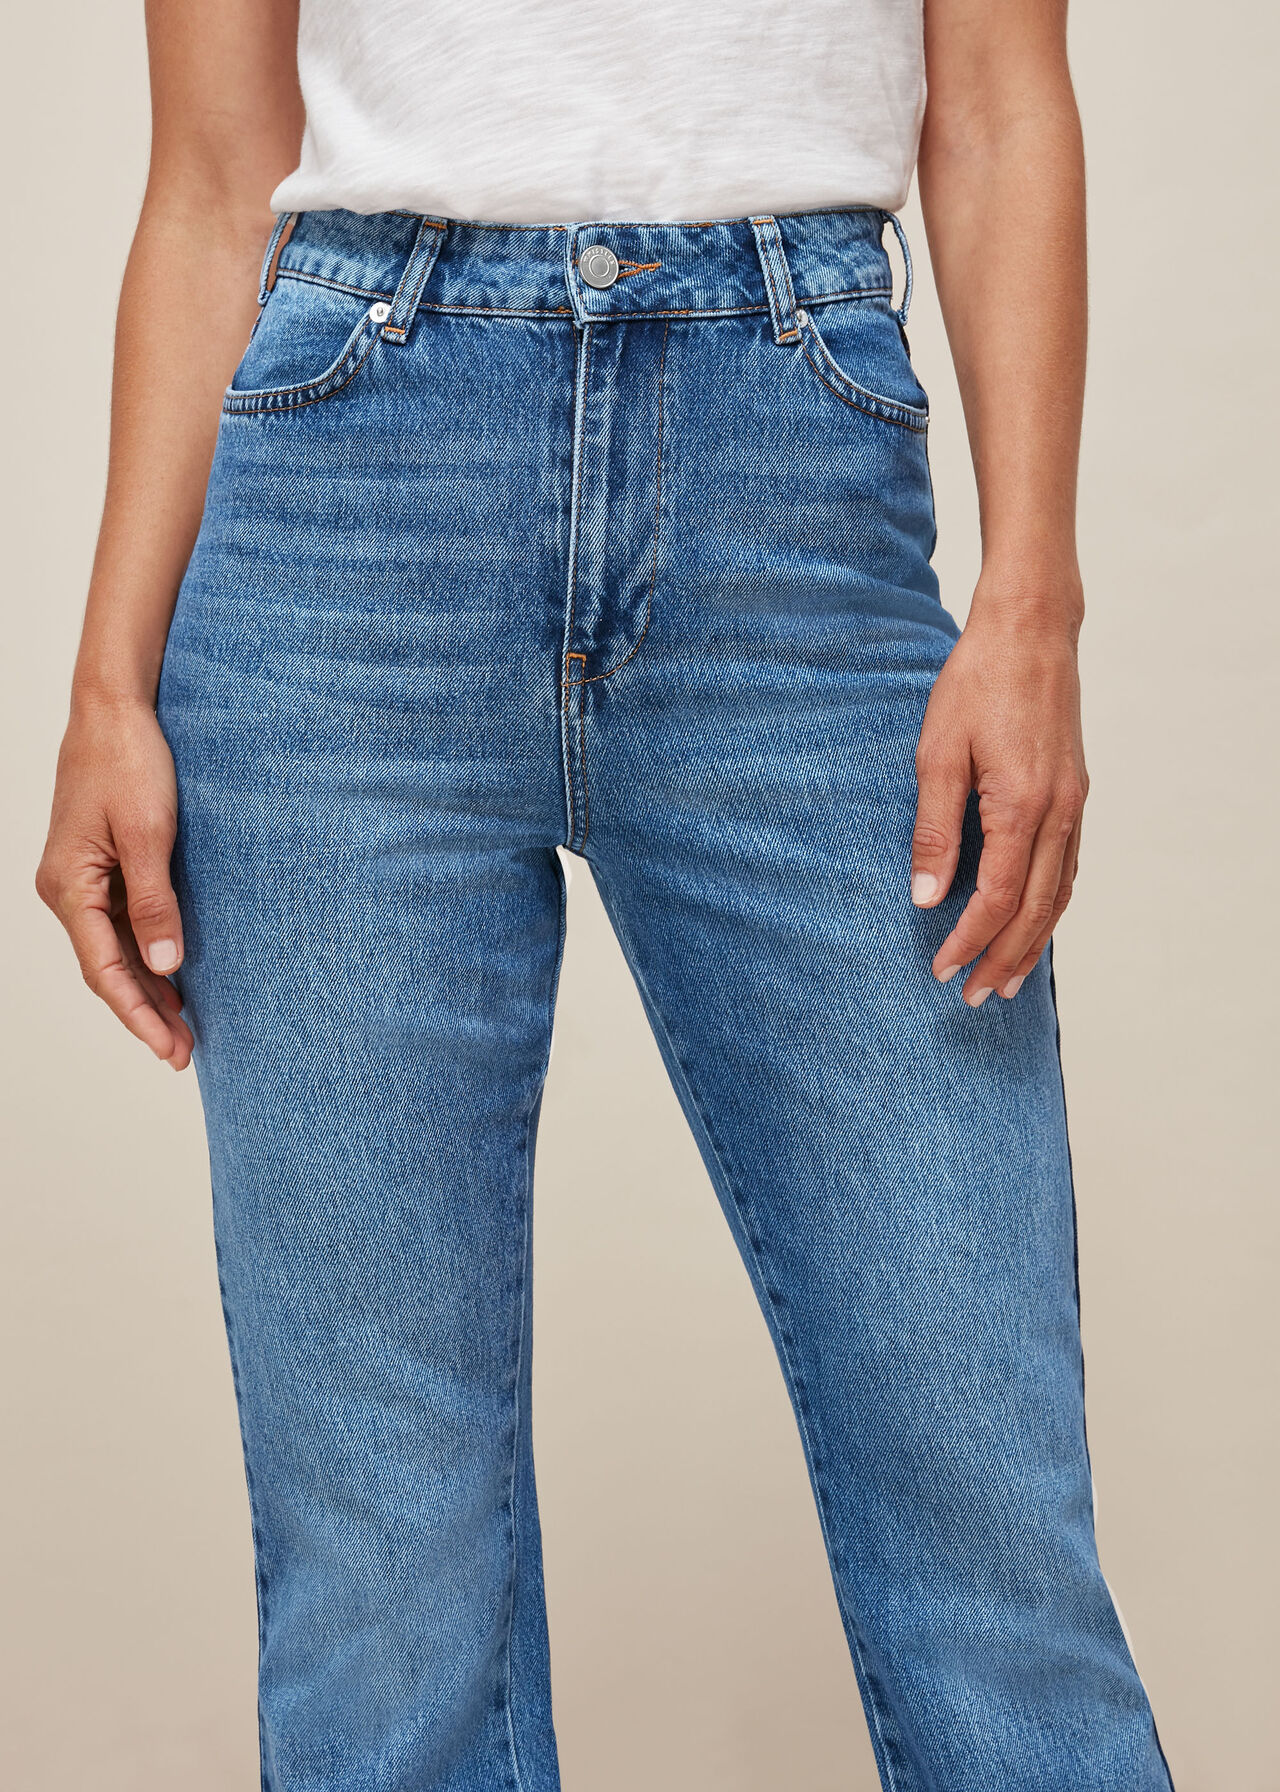 Authentic Flared Jean